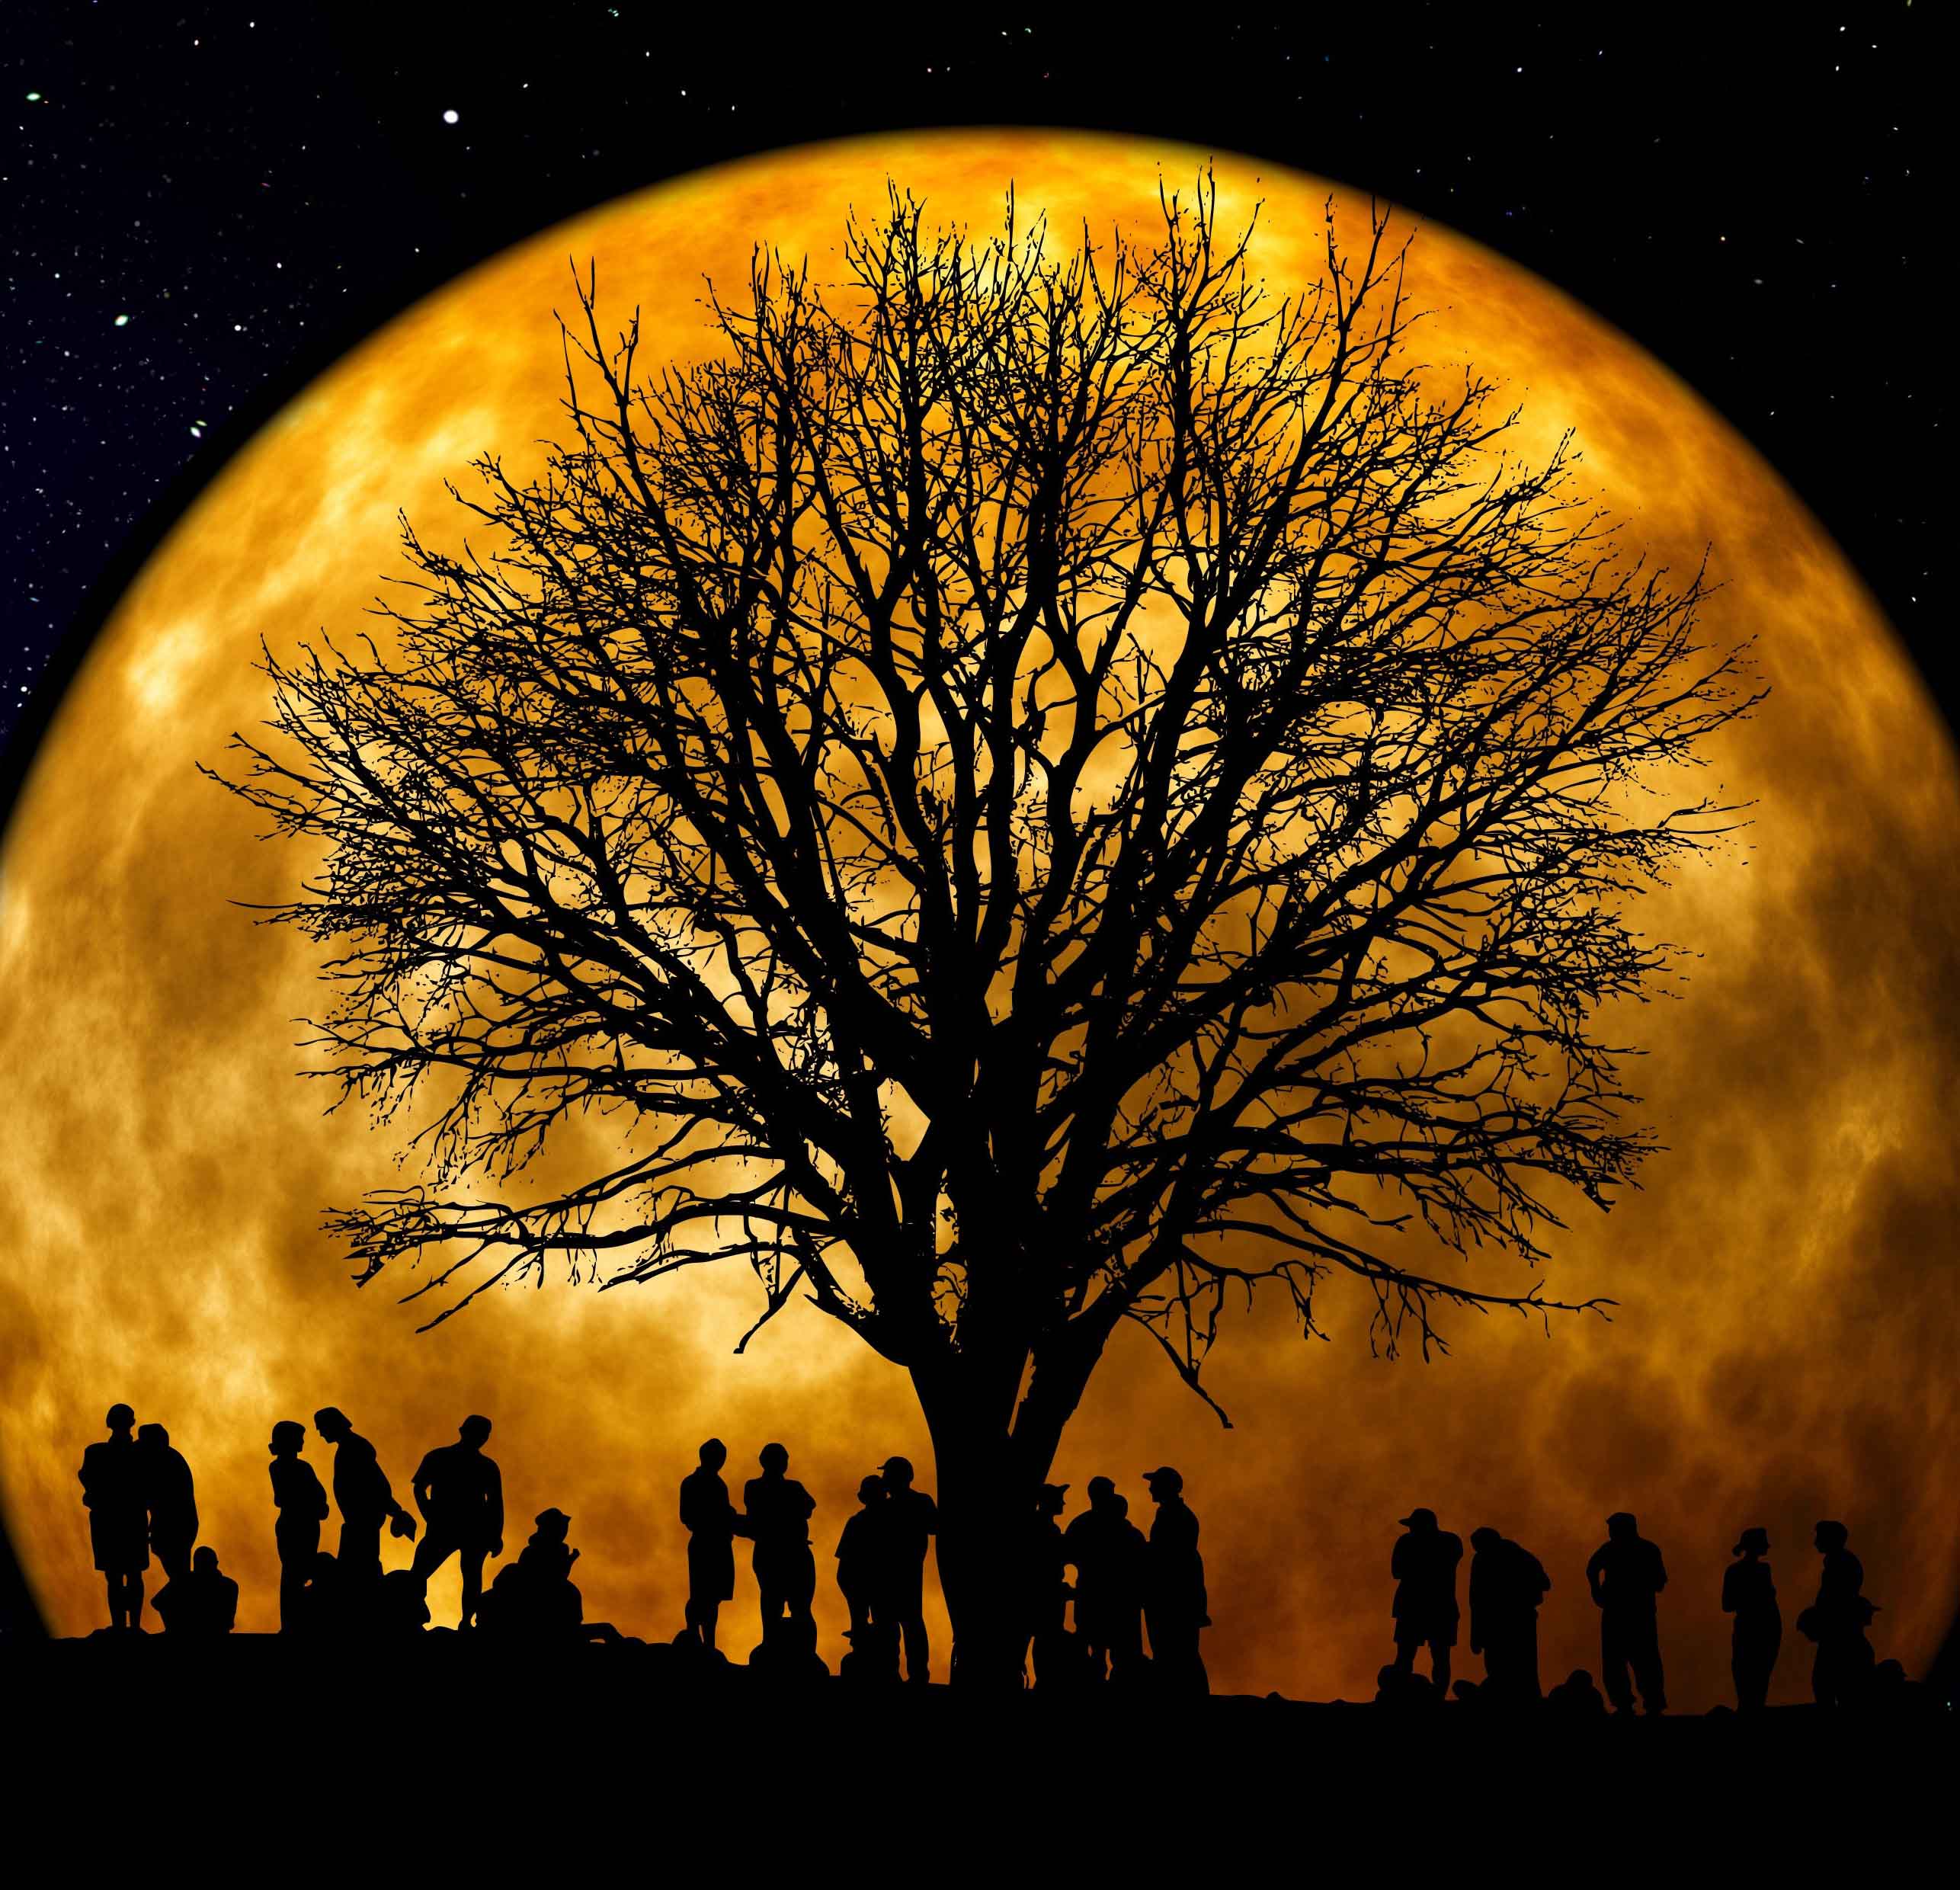 silhouette of tree and people in front of large orange moon